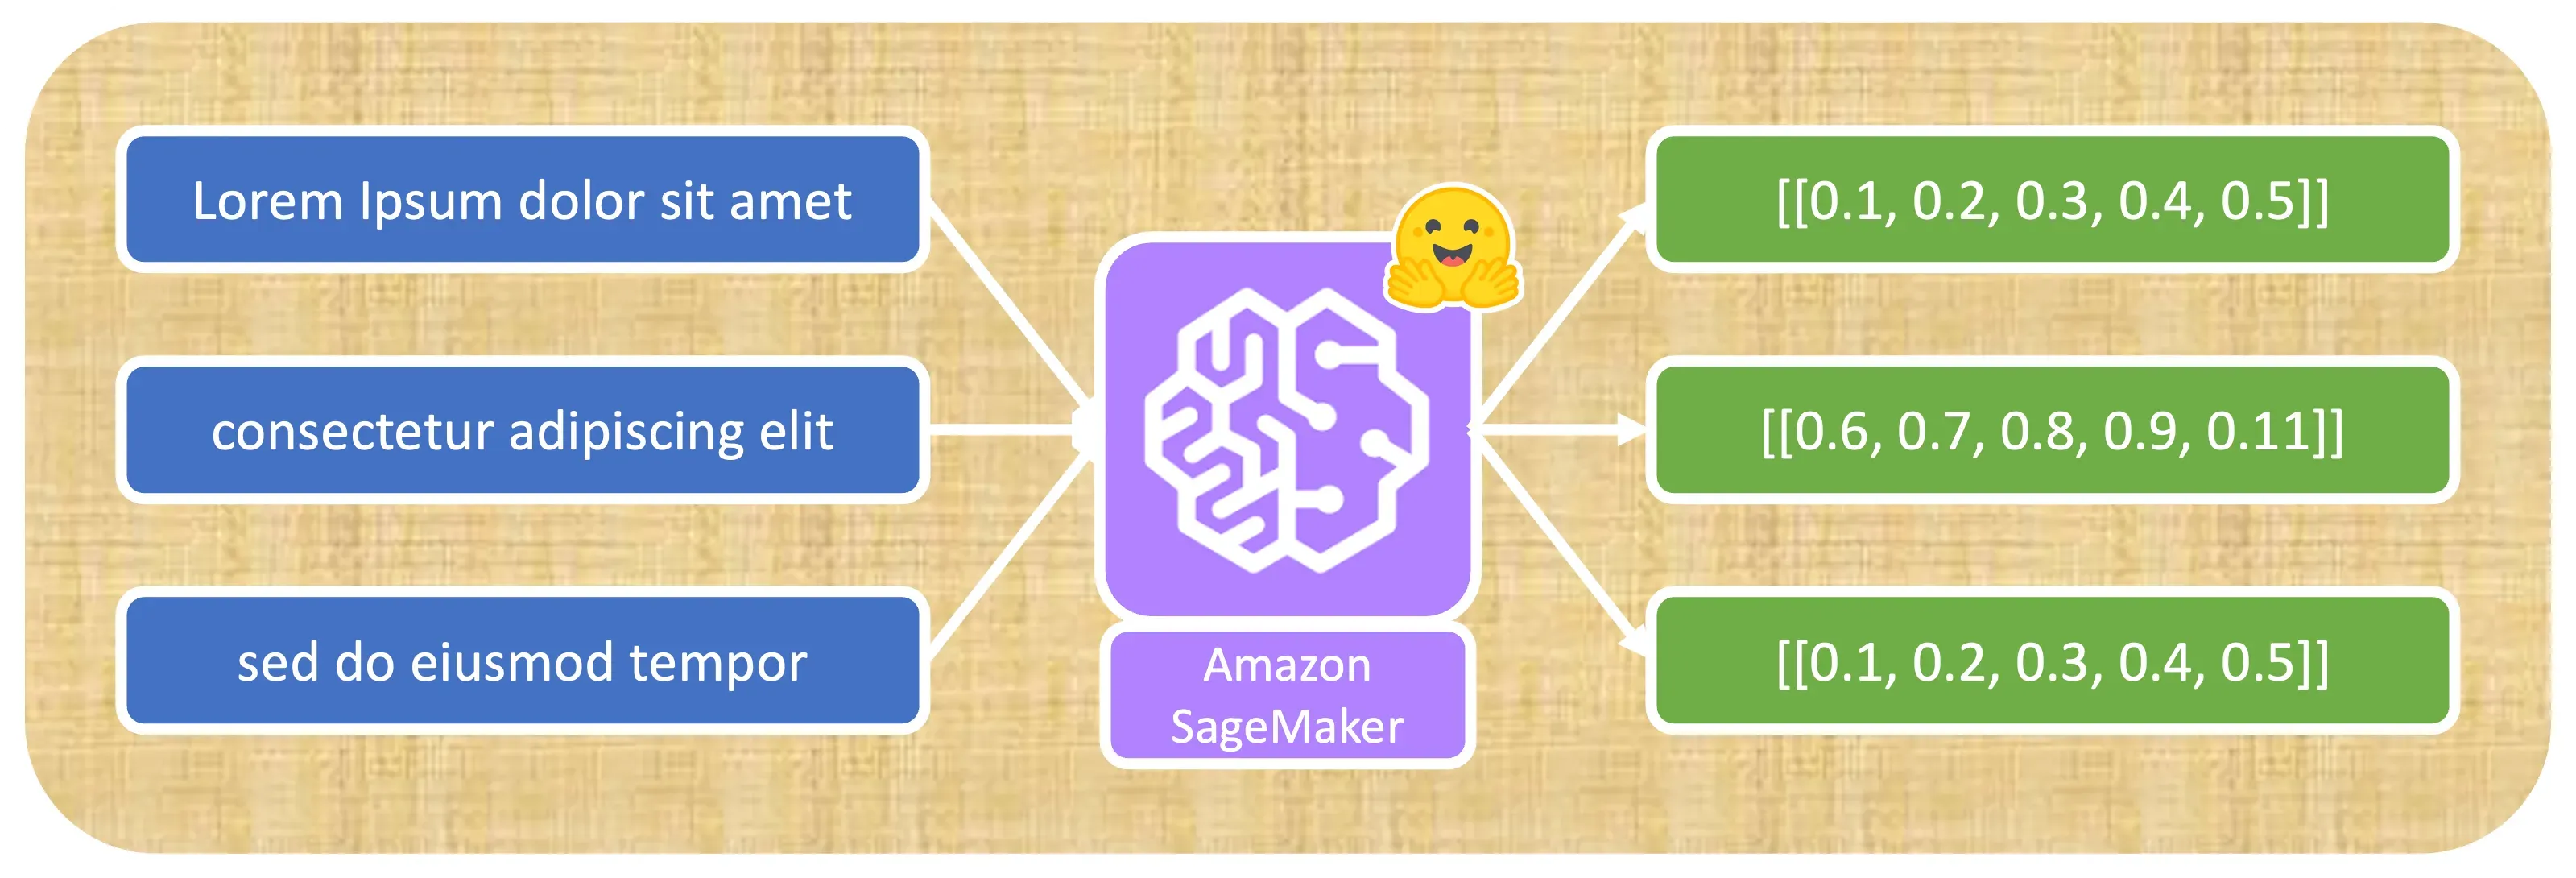 Deploying an HuggingFace embedding model to Amazon SageMaker and consuming it with Llama-Index